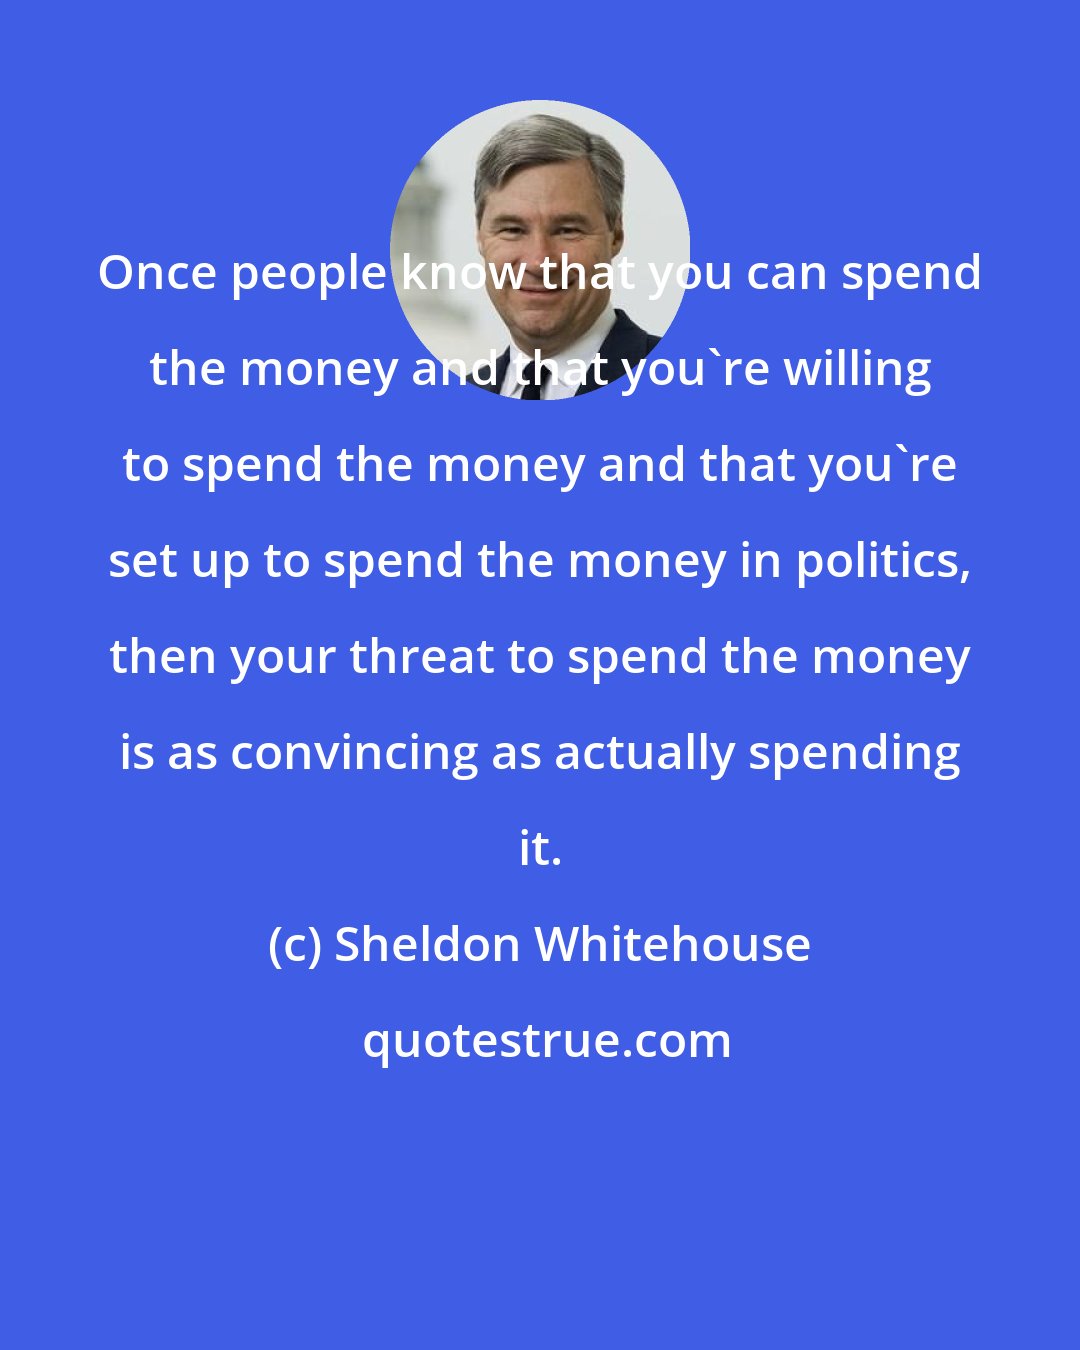 Sheldon Whitehouse: Once people know that you can spend the money and that you're willing to spend the money and that you're set up to spend the money in politics, then your threat to spend the money is as convincing as actually spending it.